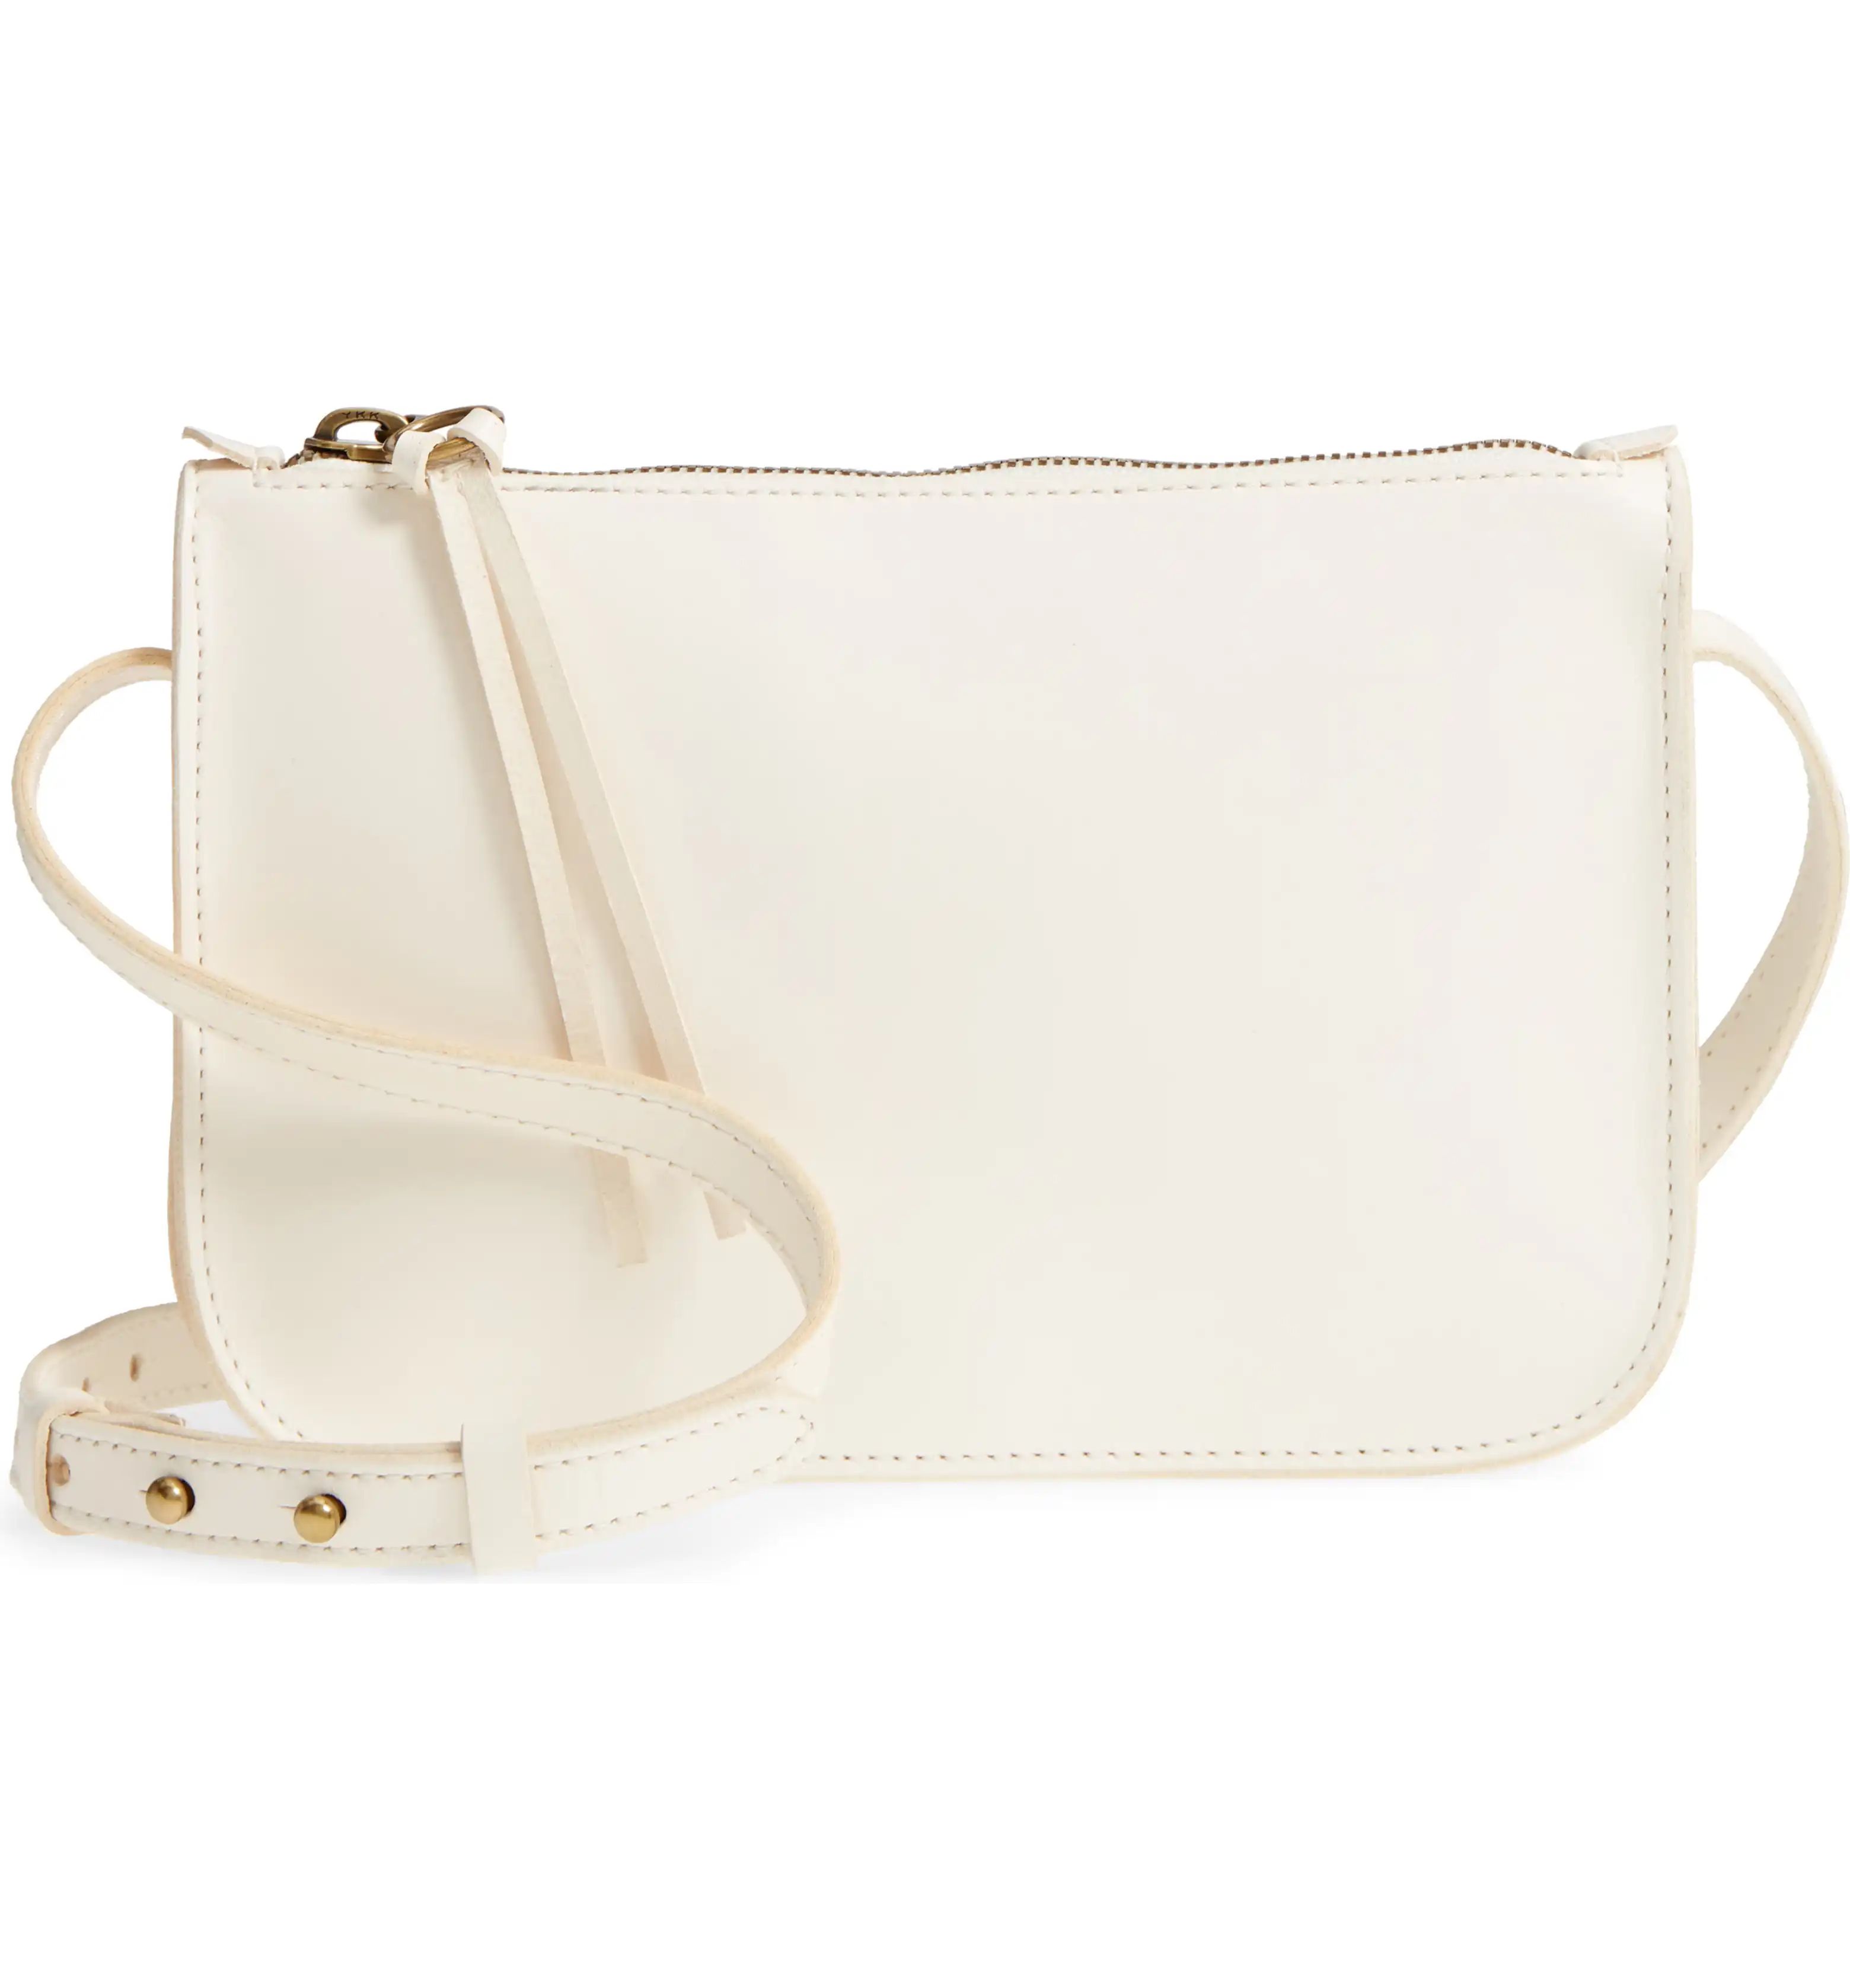 Simple Leather Crossbody Bag | Nordstrom